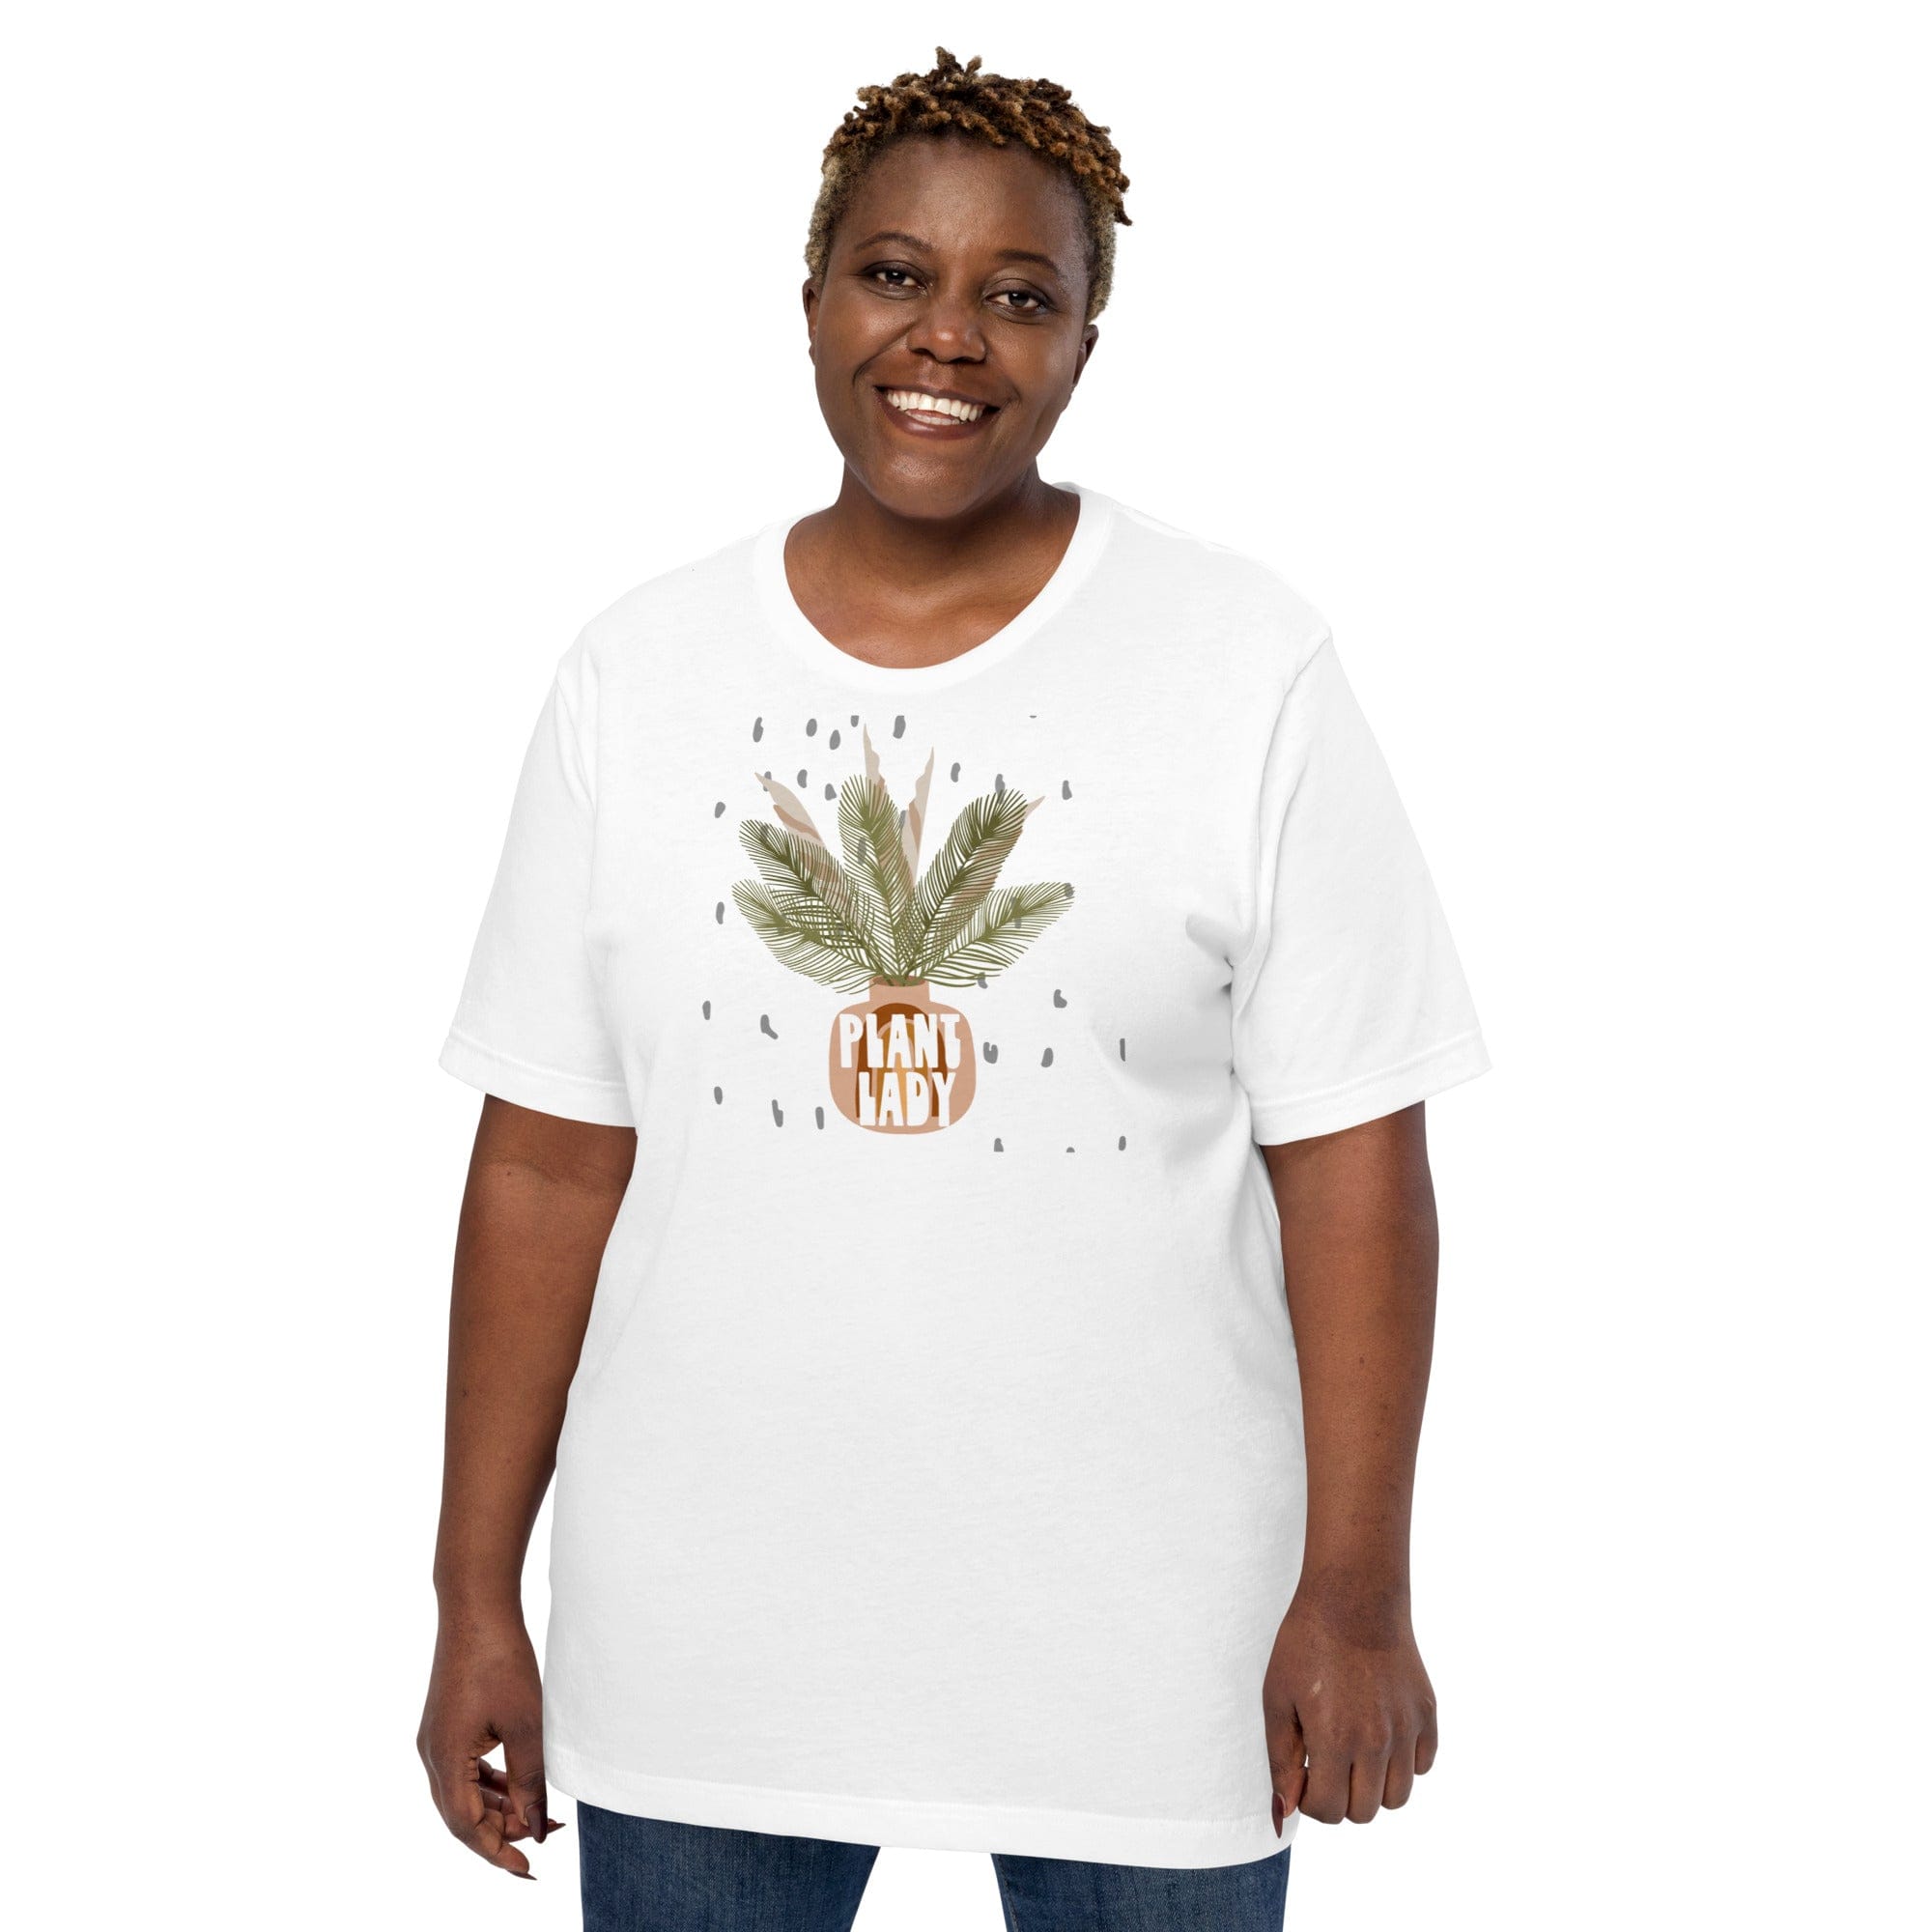 Spruced Roost Plant Lady Women's Organic T-Shirt - XS-5XL